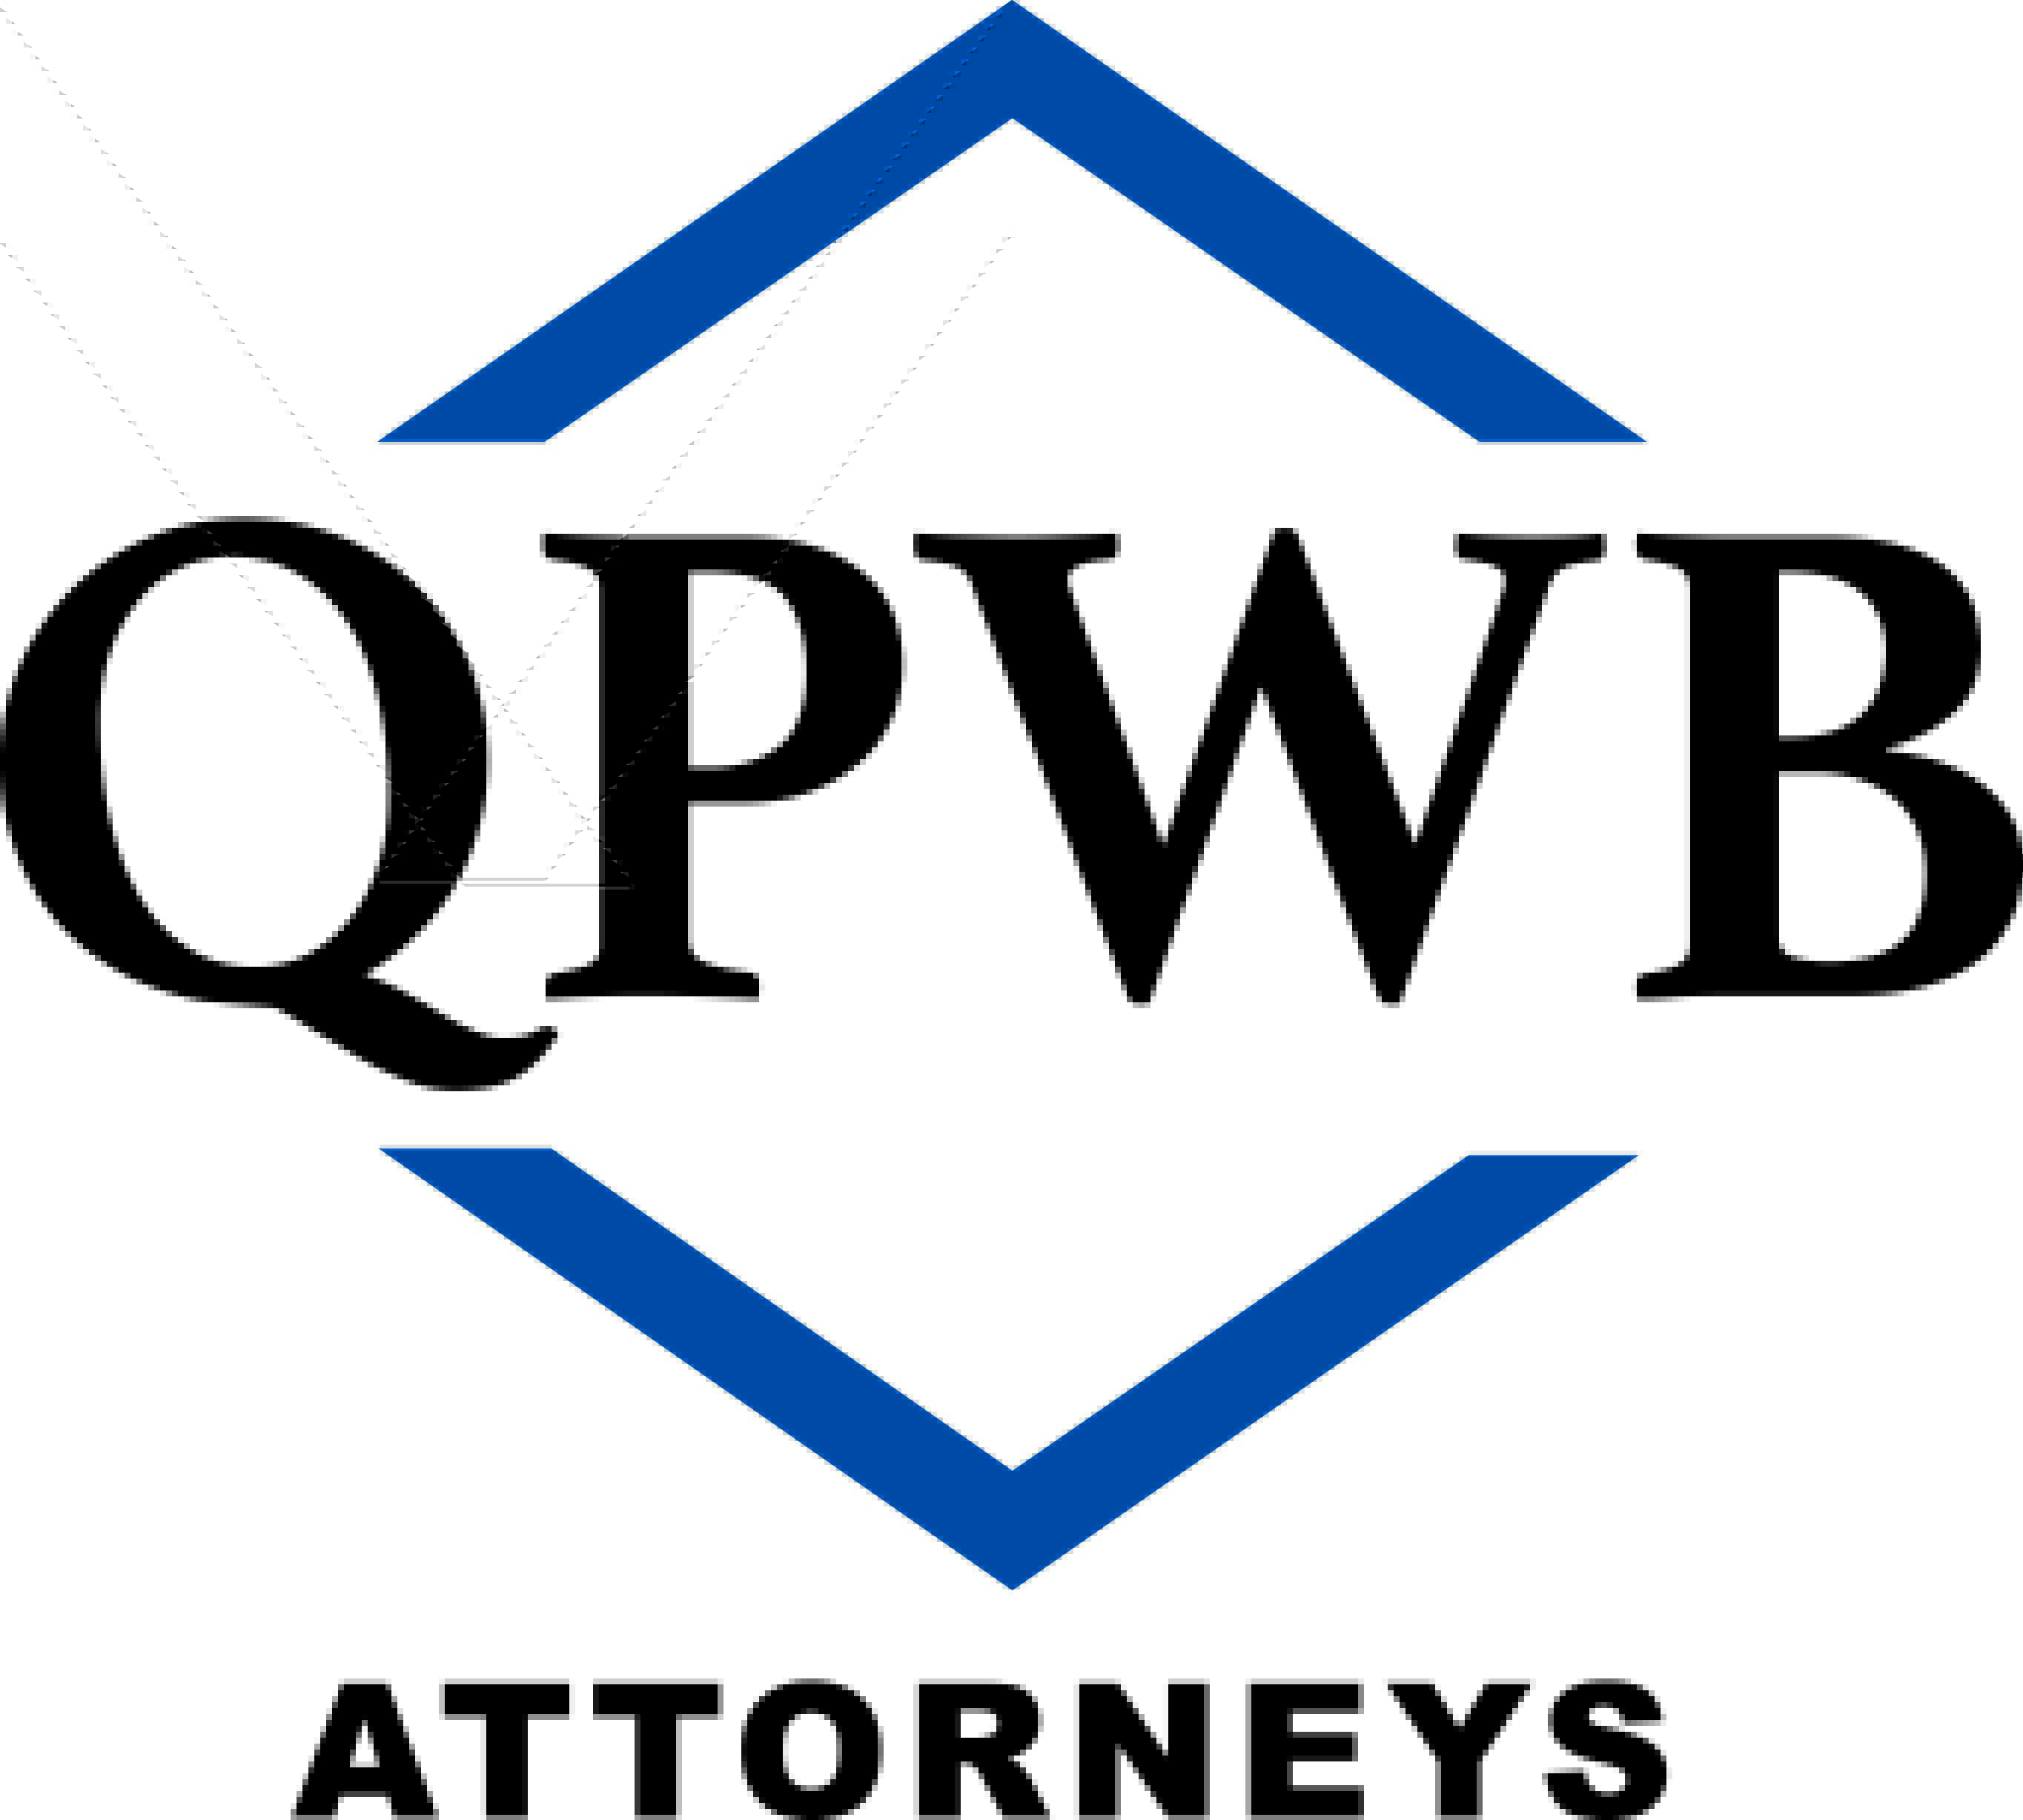 QPWB Quintairos, Prieto, Wood & Boyer P.A. Attorneys at Law